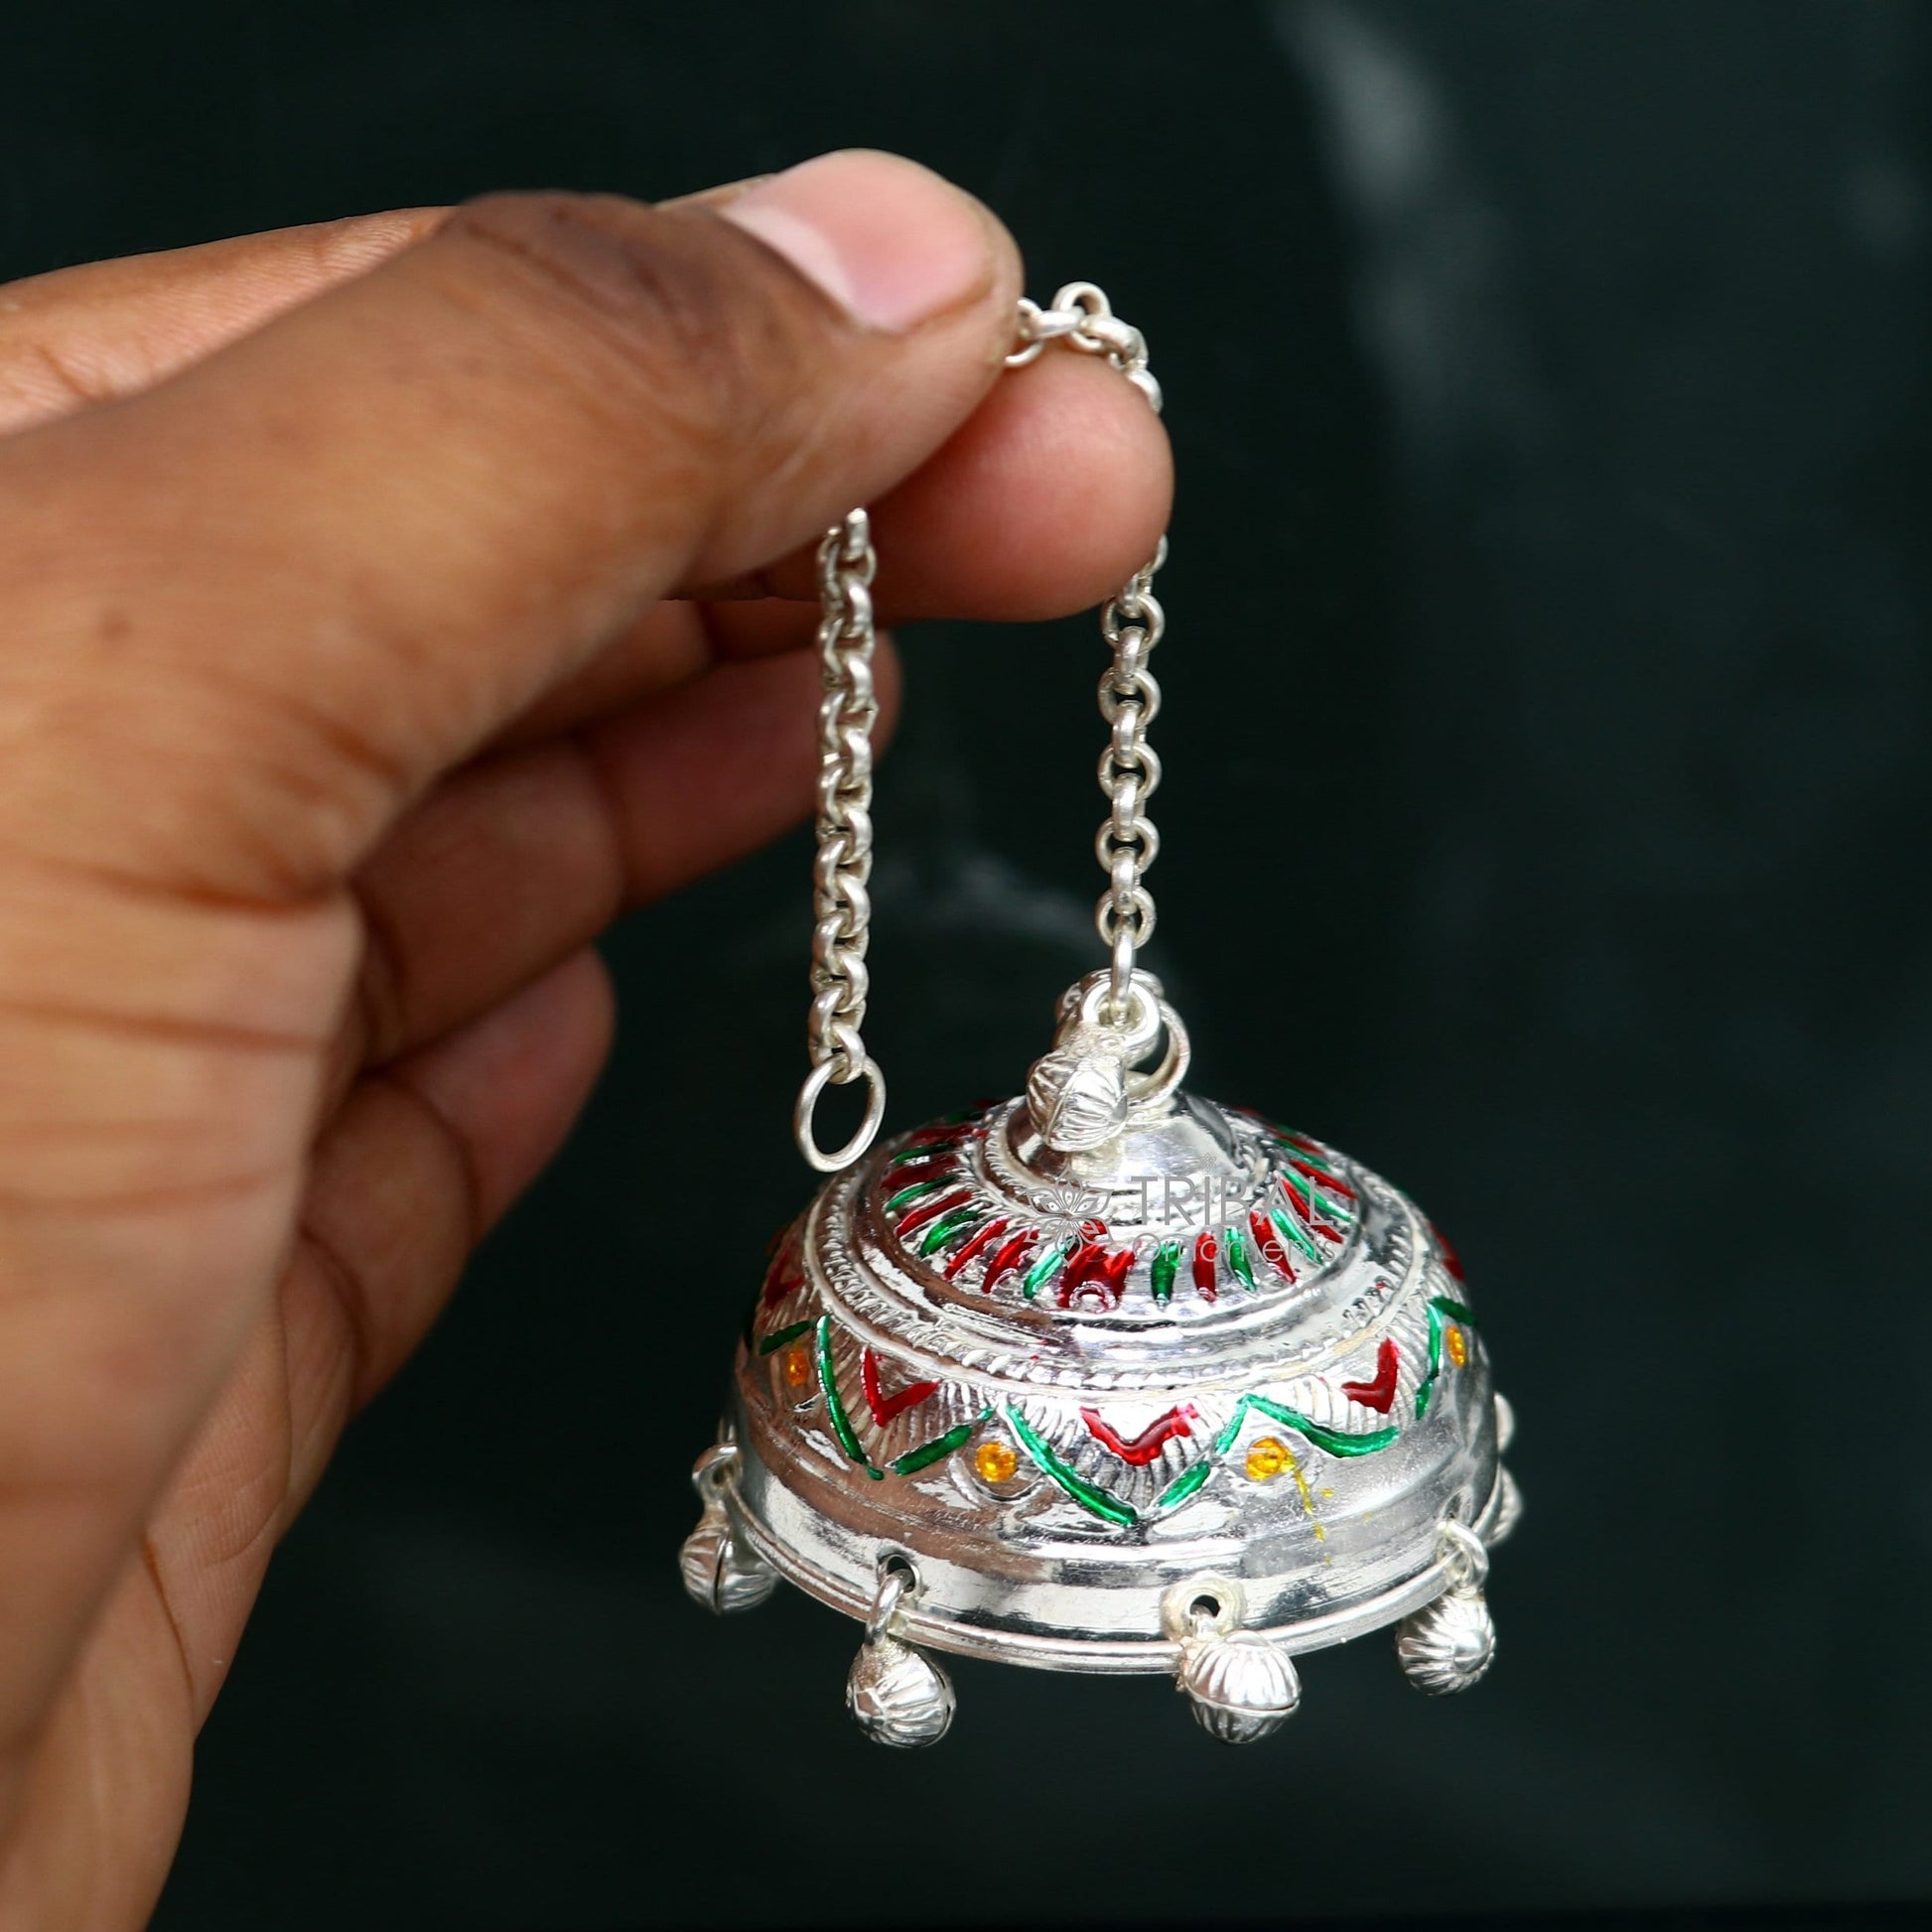 925 sterling Silver chatter/chatar, silver umbrella god temple art, Silver chandelier for temple Puja worshipping utensils su1118 - TRIBAL ORNAMENTS